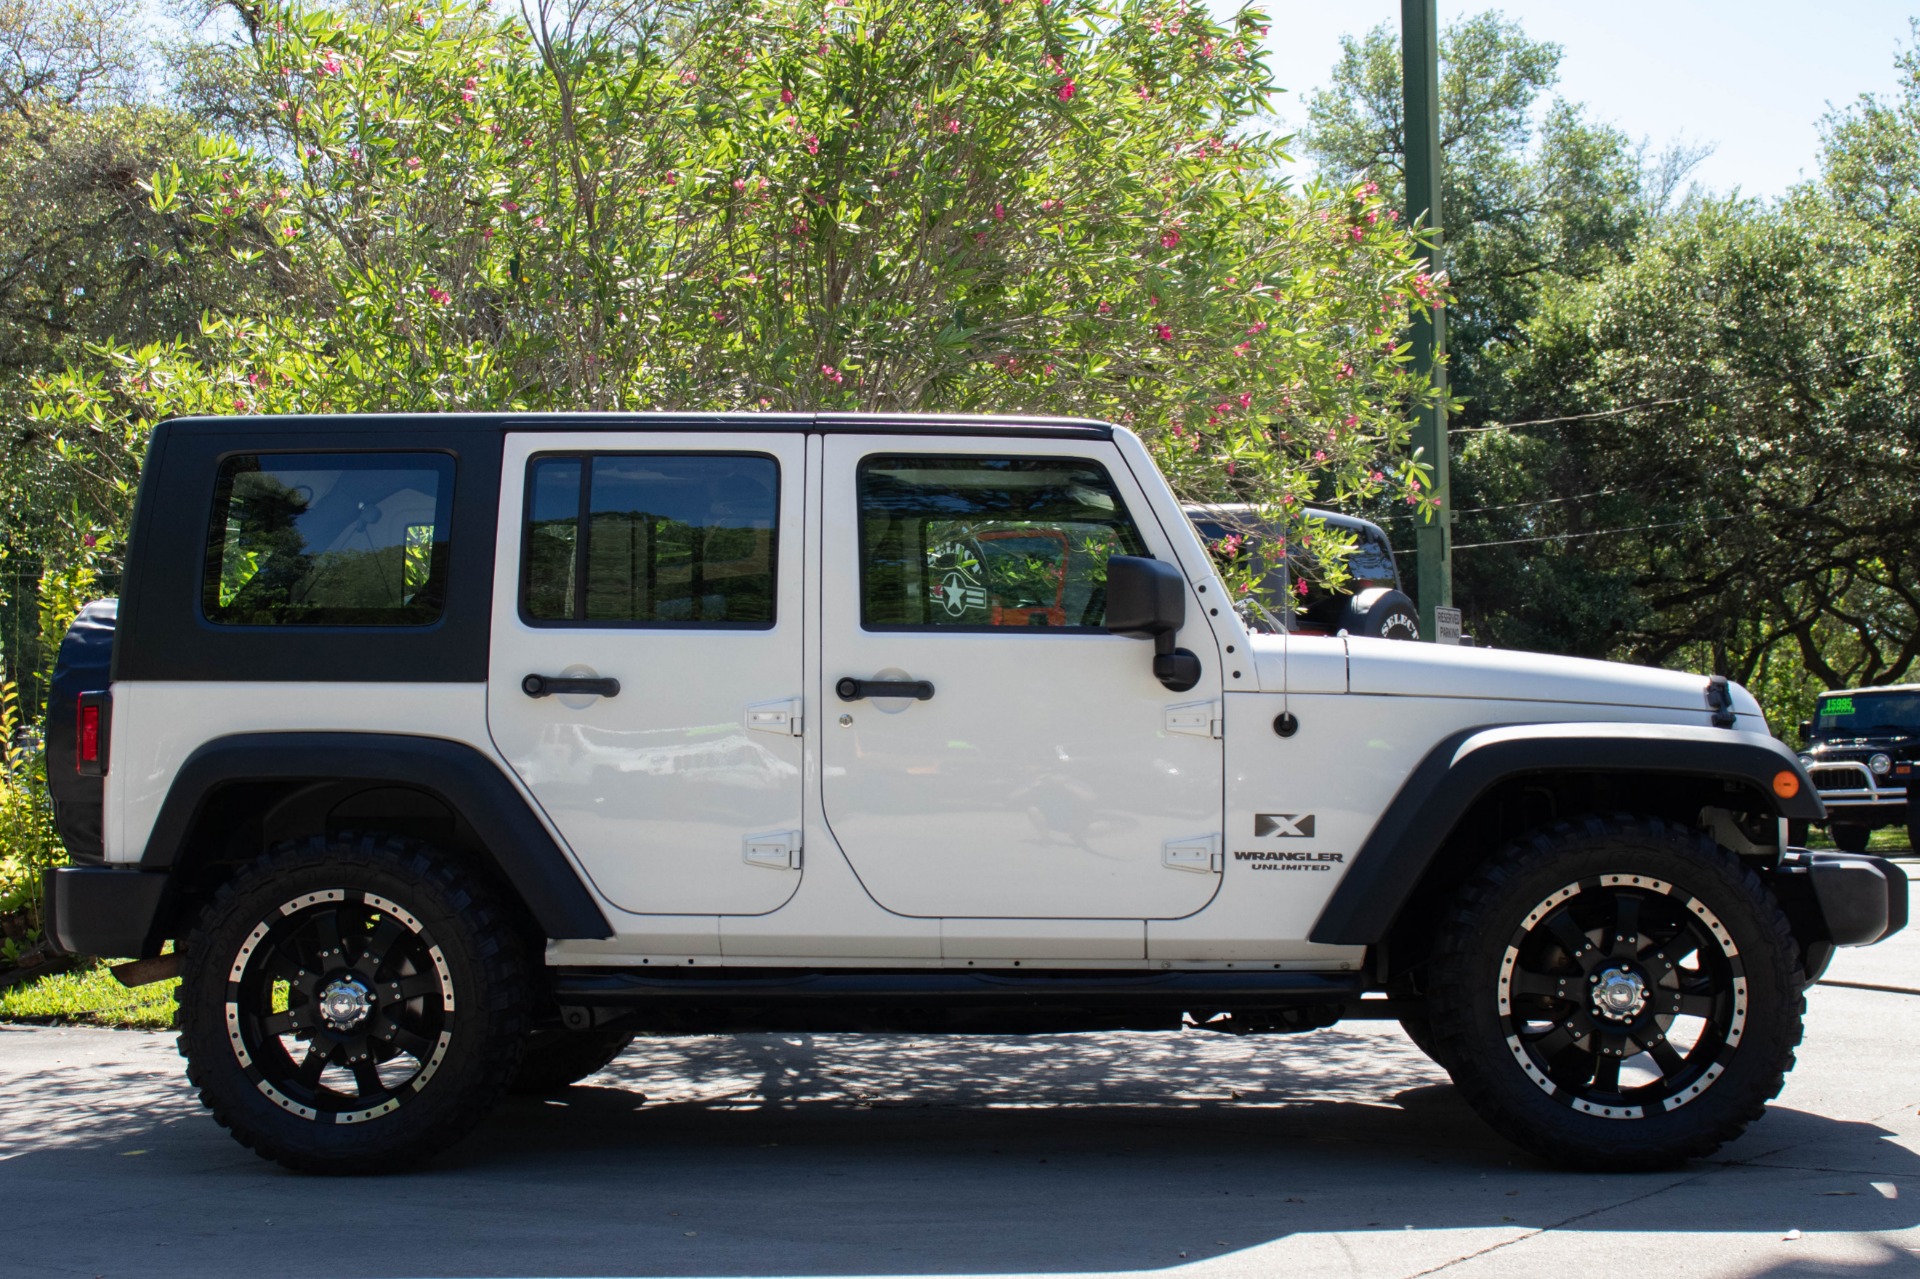 Used 2009 Jeep Wrangler Unlimited X For Sale ($21,995) | Select Jeeps Inc.  Stock #707937